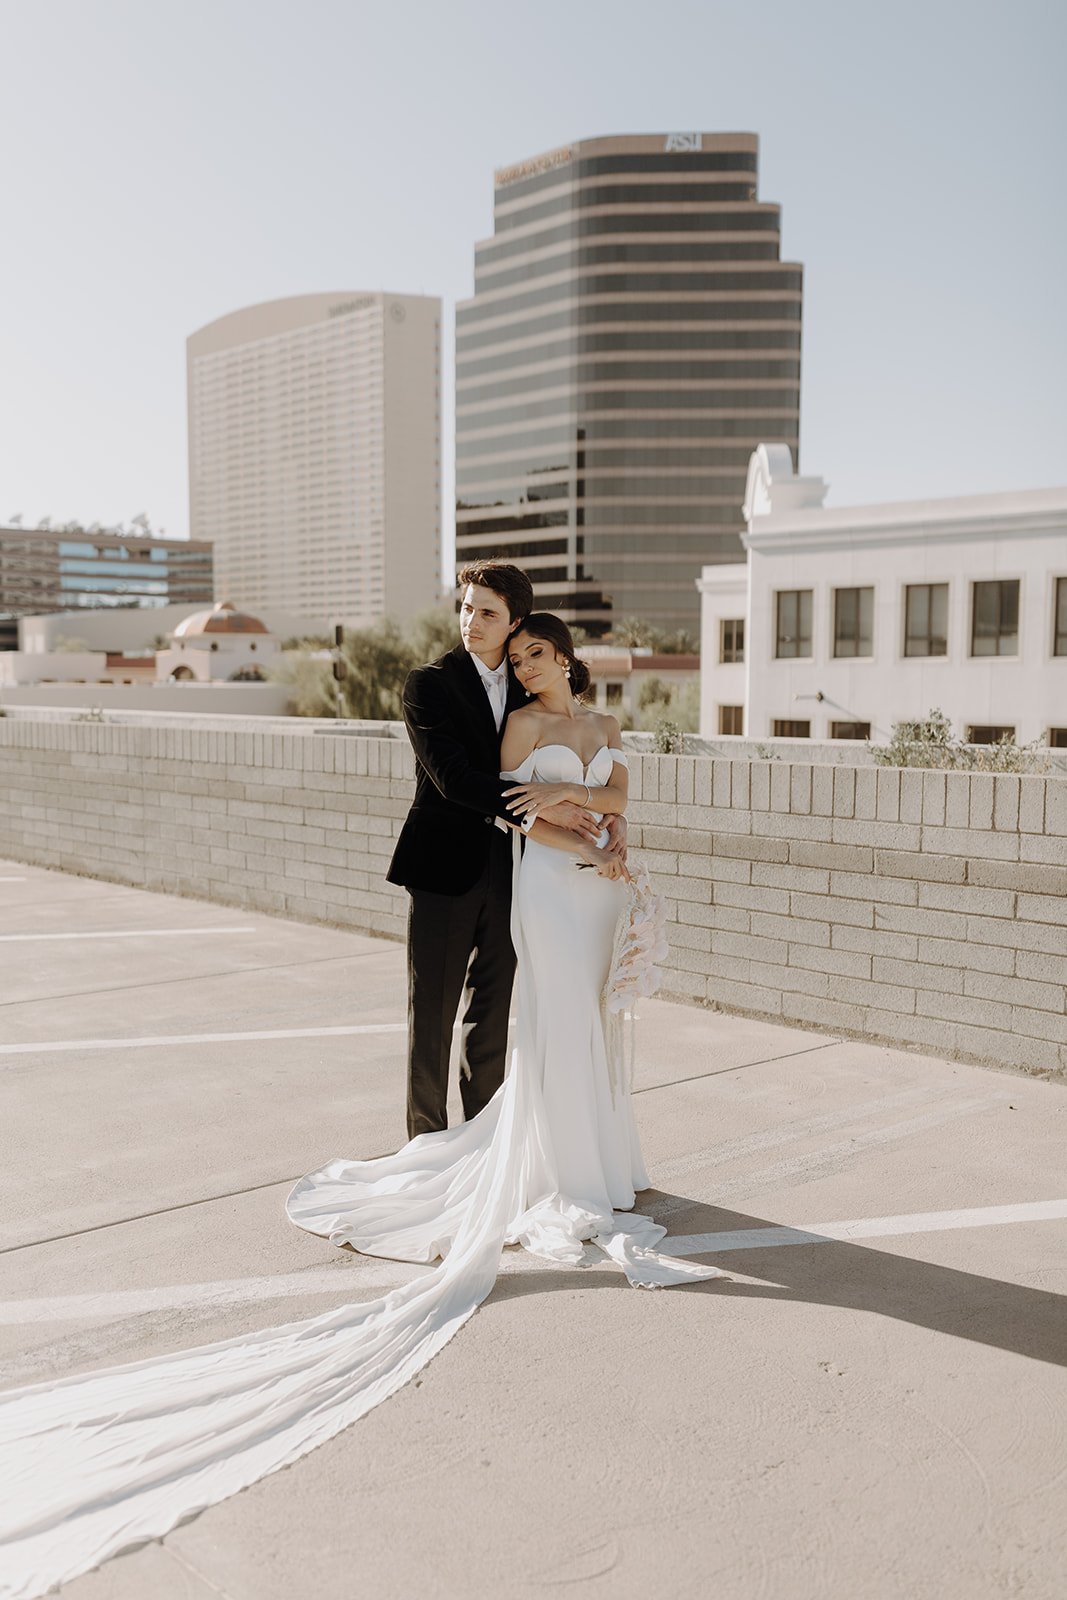 Bride and groom portrait on the top of a parking garage in Arizona